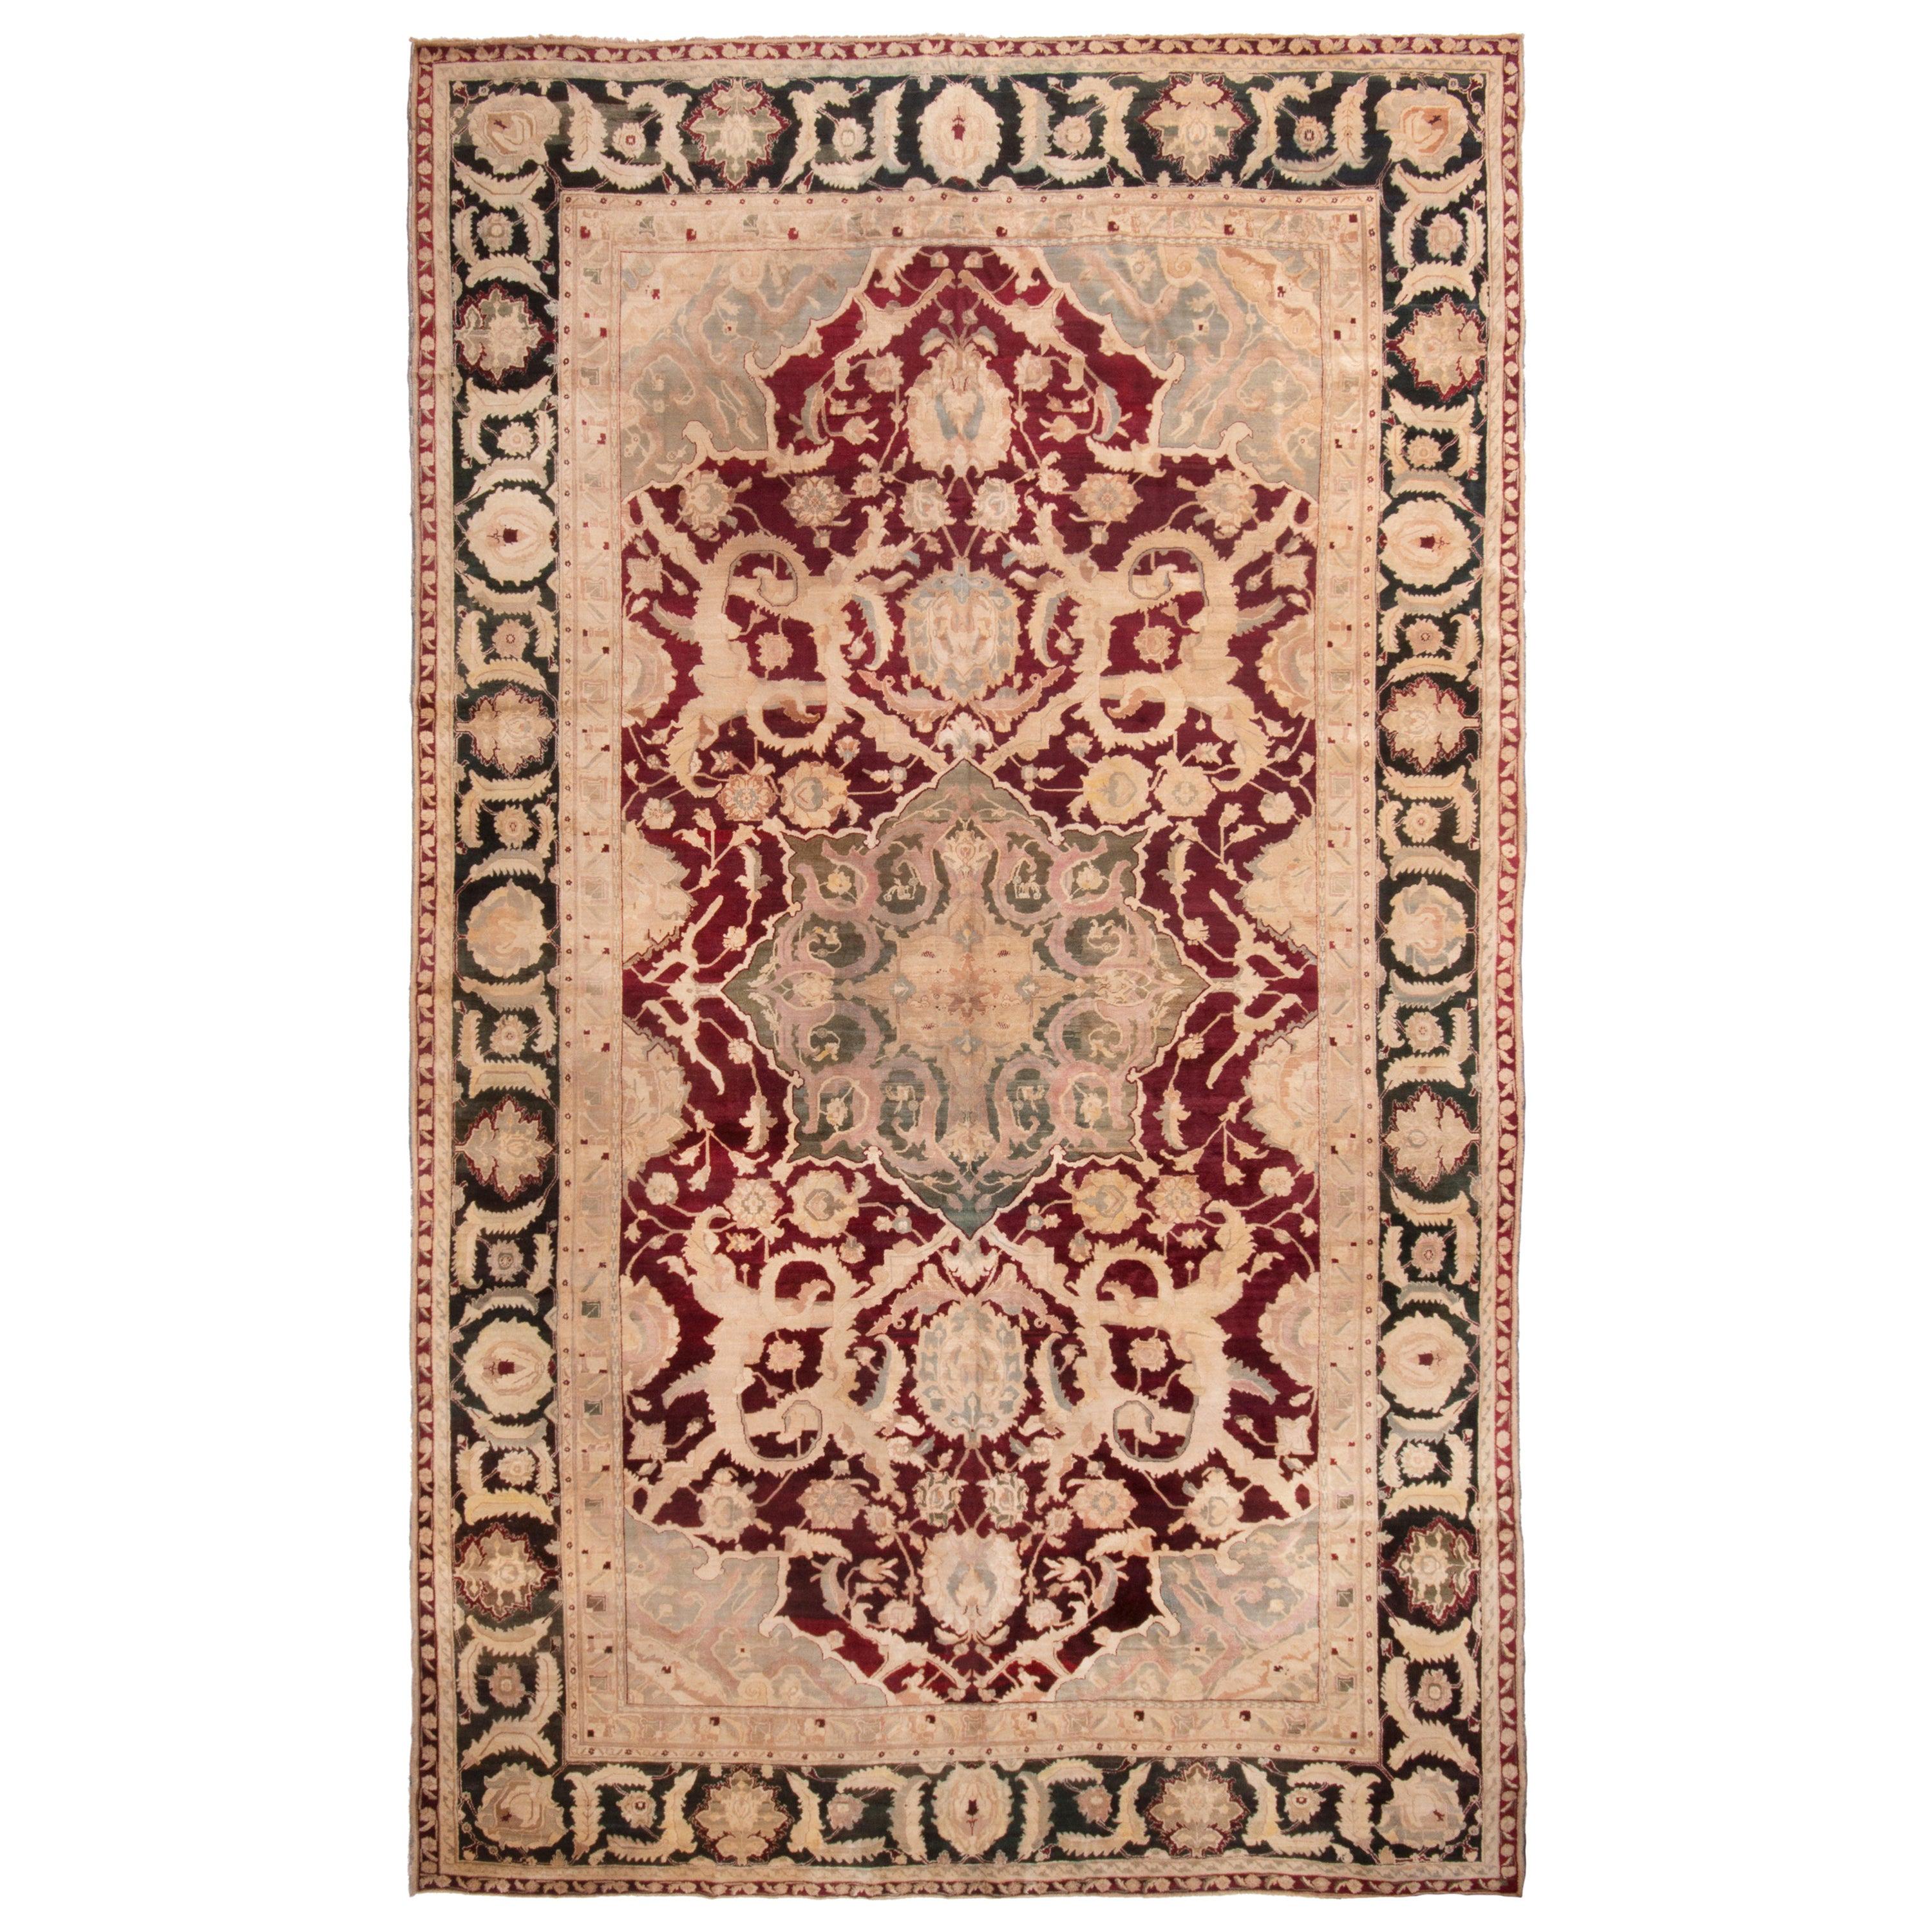 Antique Agra Burgundy Wool Rug with All-Over Floral Patterns For Sale